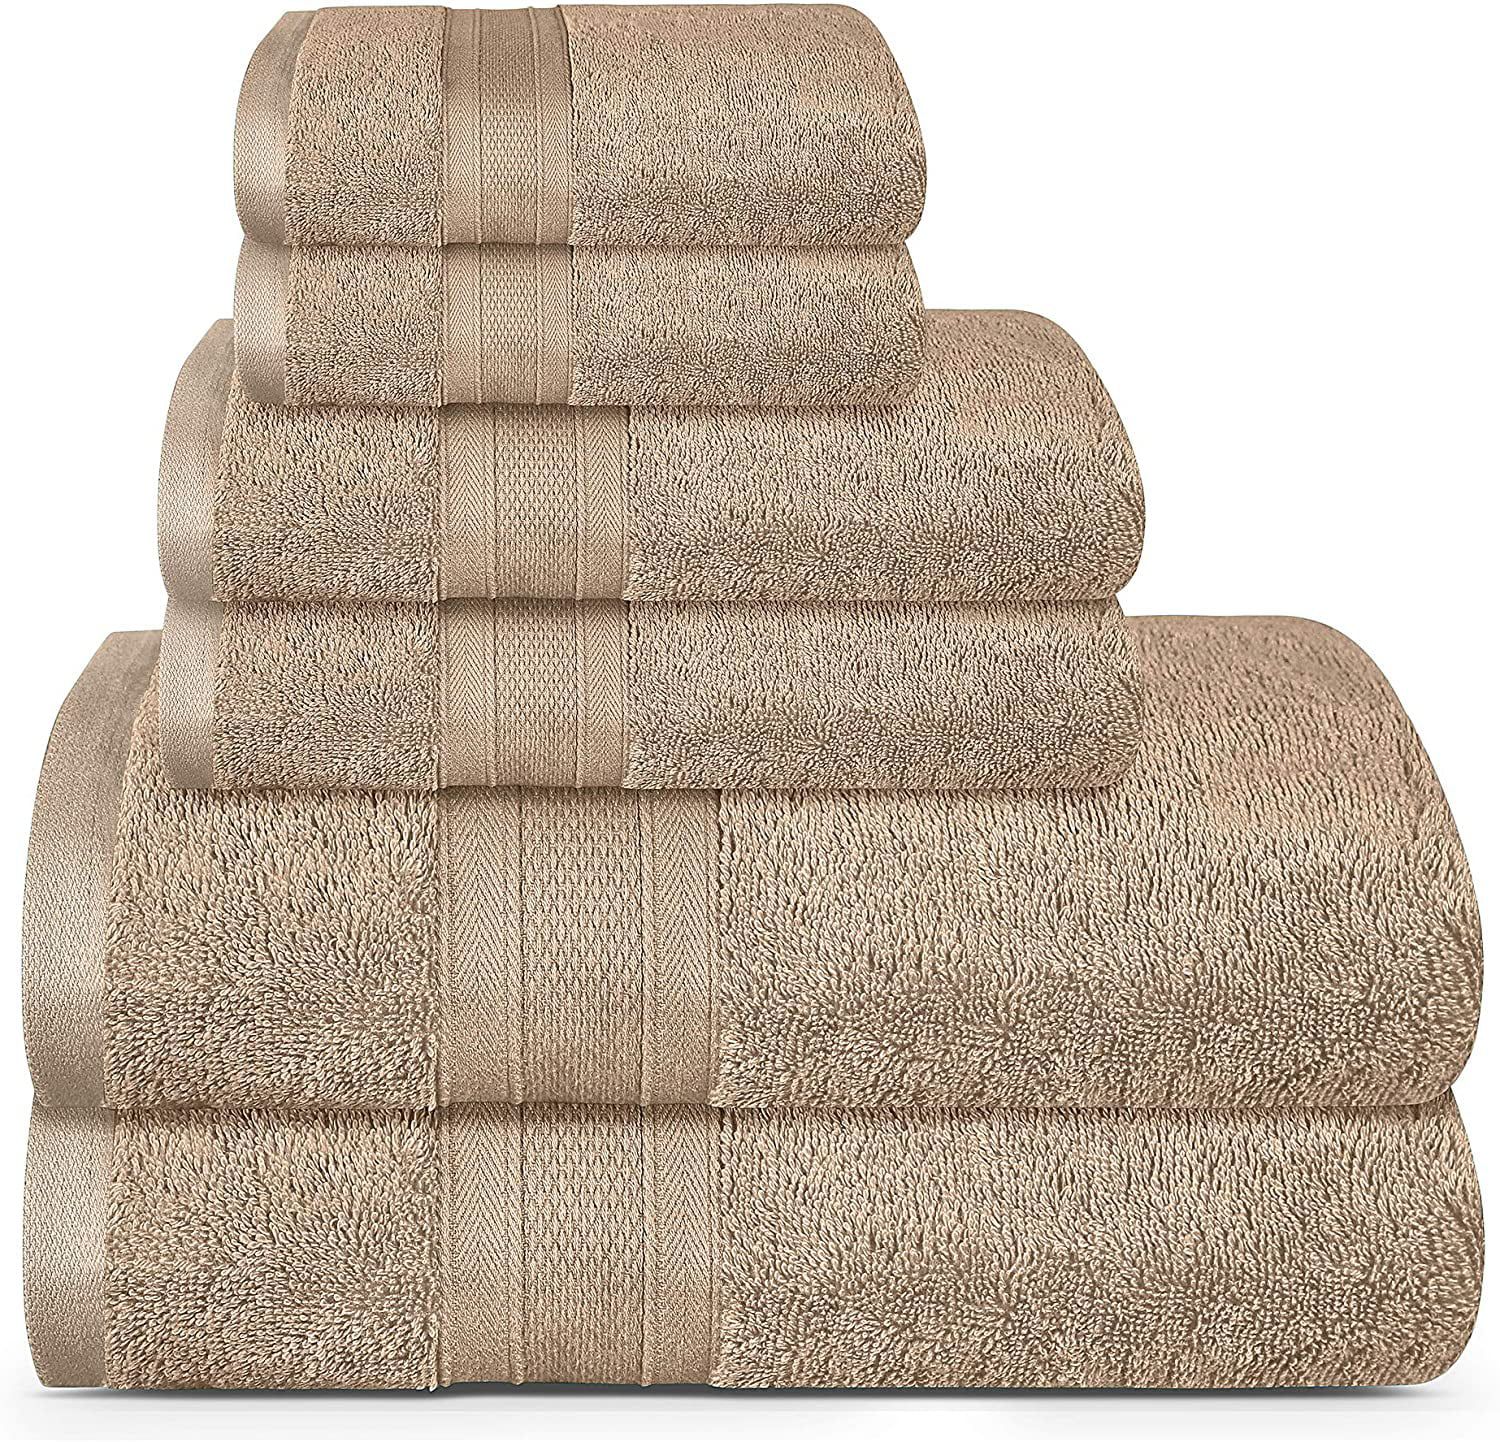 TRIDENT Soft and Plush, 100% Cotton, Highly Absorbent, Bathroom Towels, Super Soft, 6 Piece Towel... | Walmart (US)